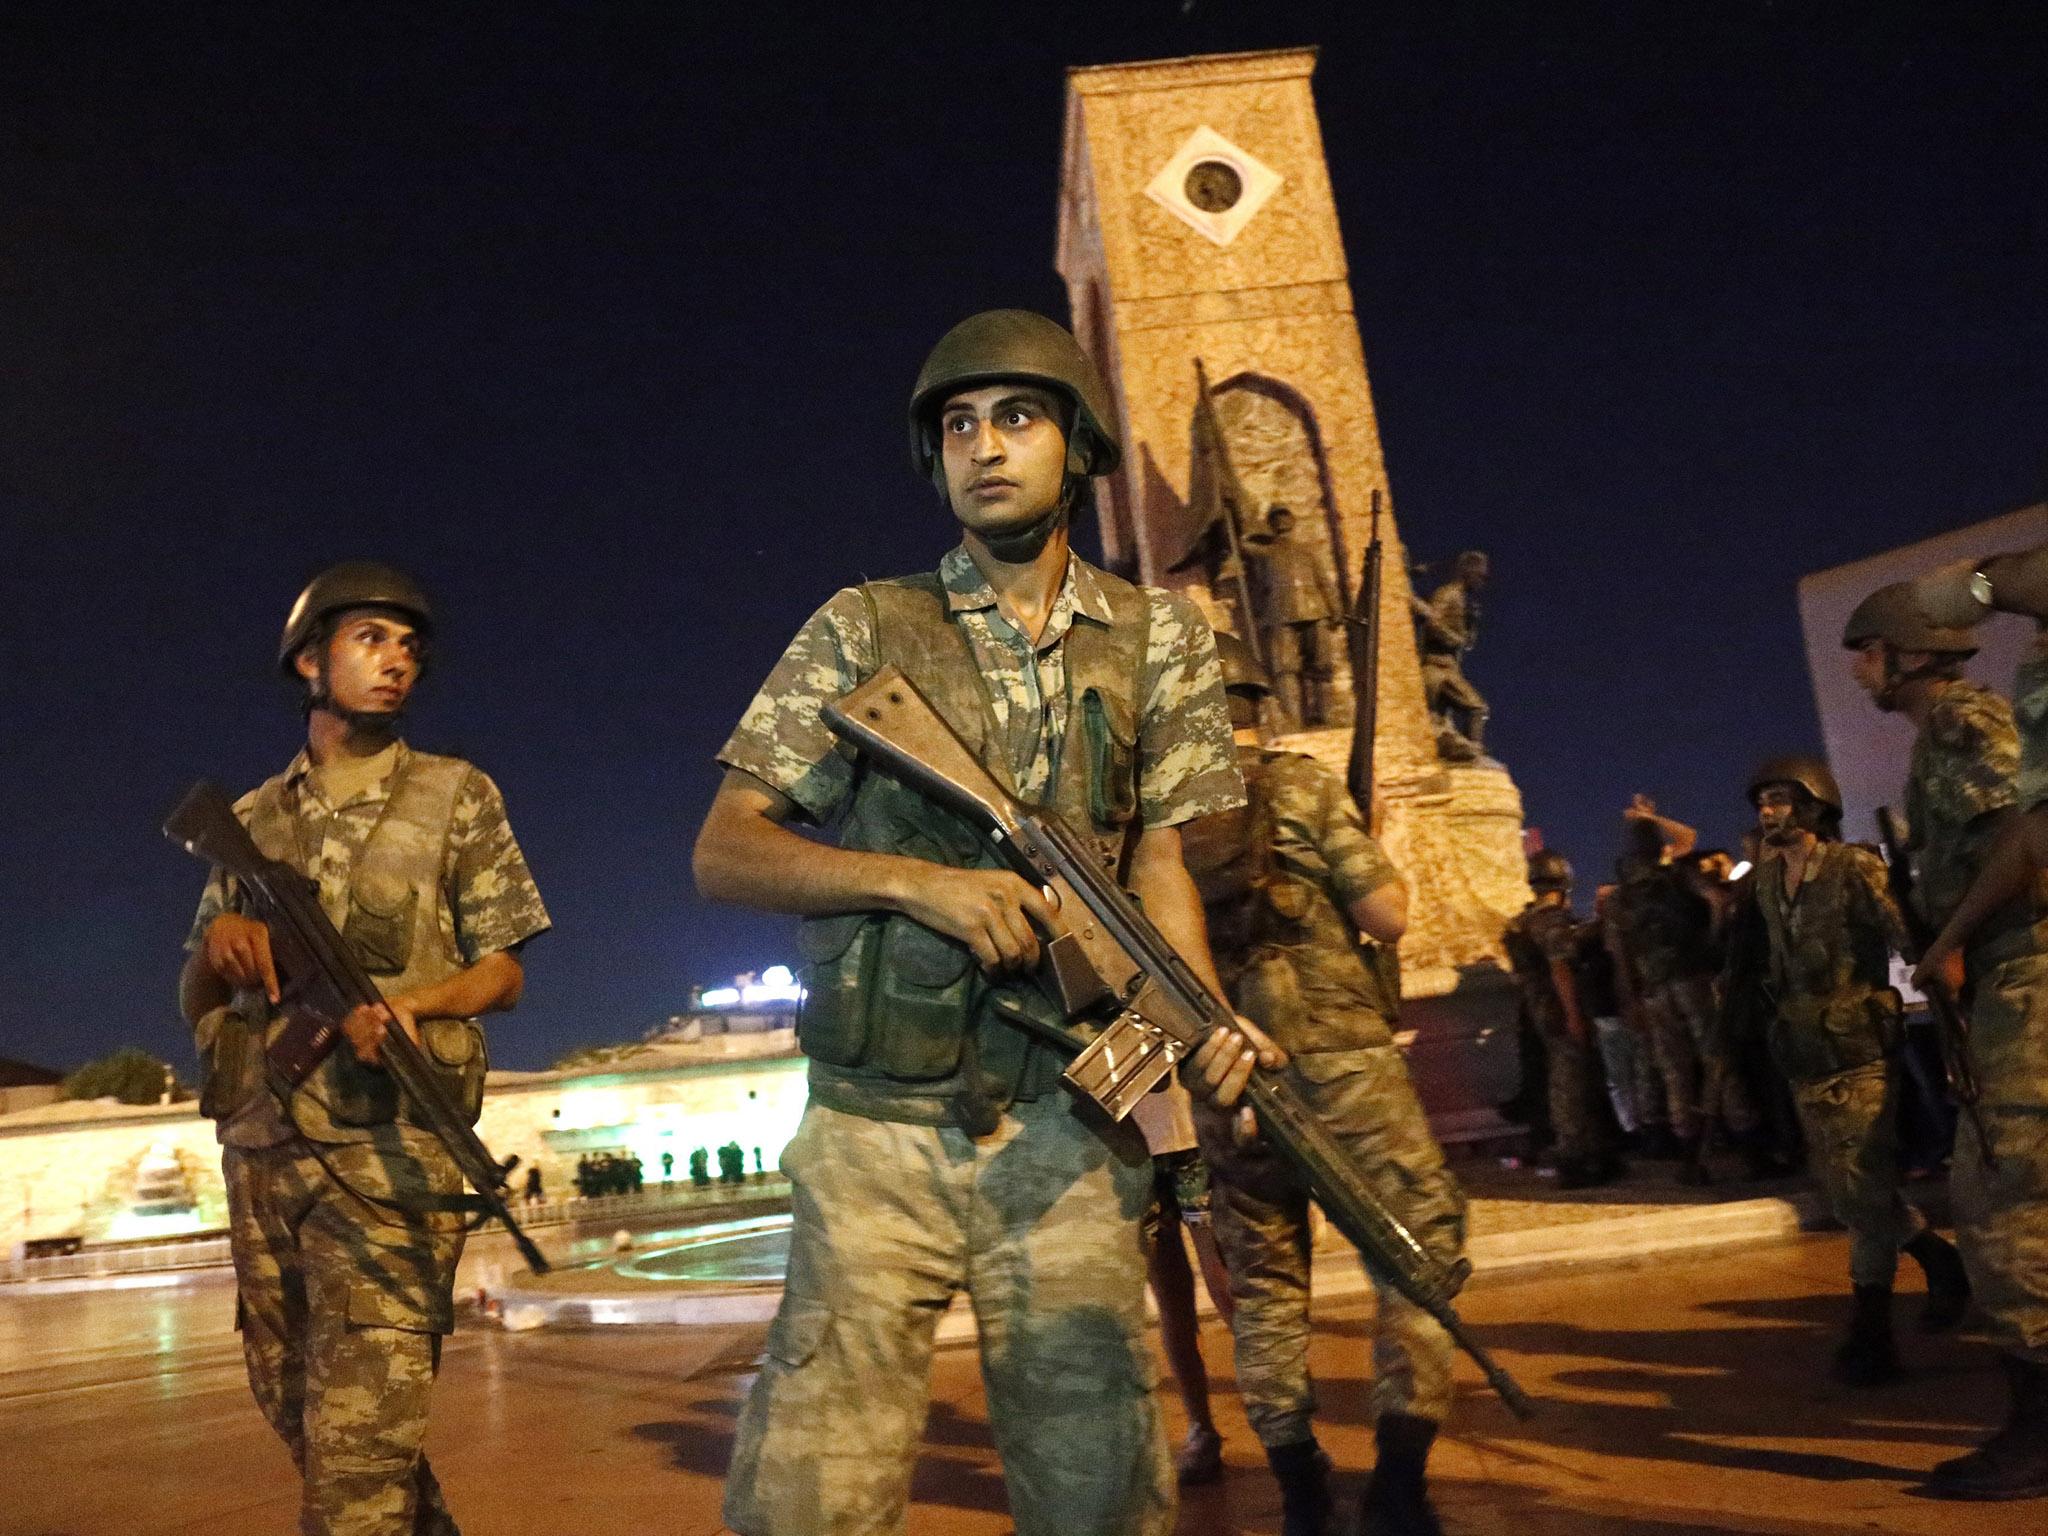 Turkish soldiers stand guard at the Taksim Square in Istanbul, Turkey